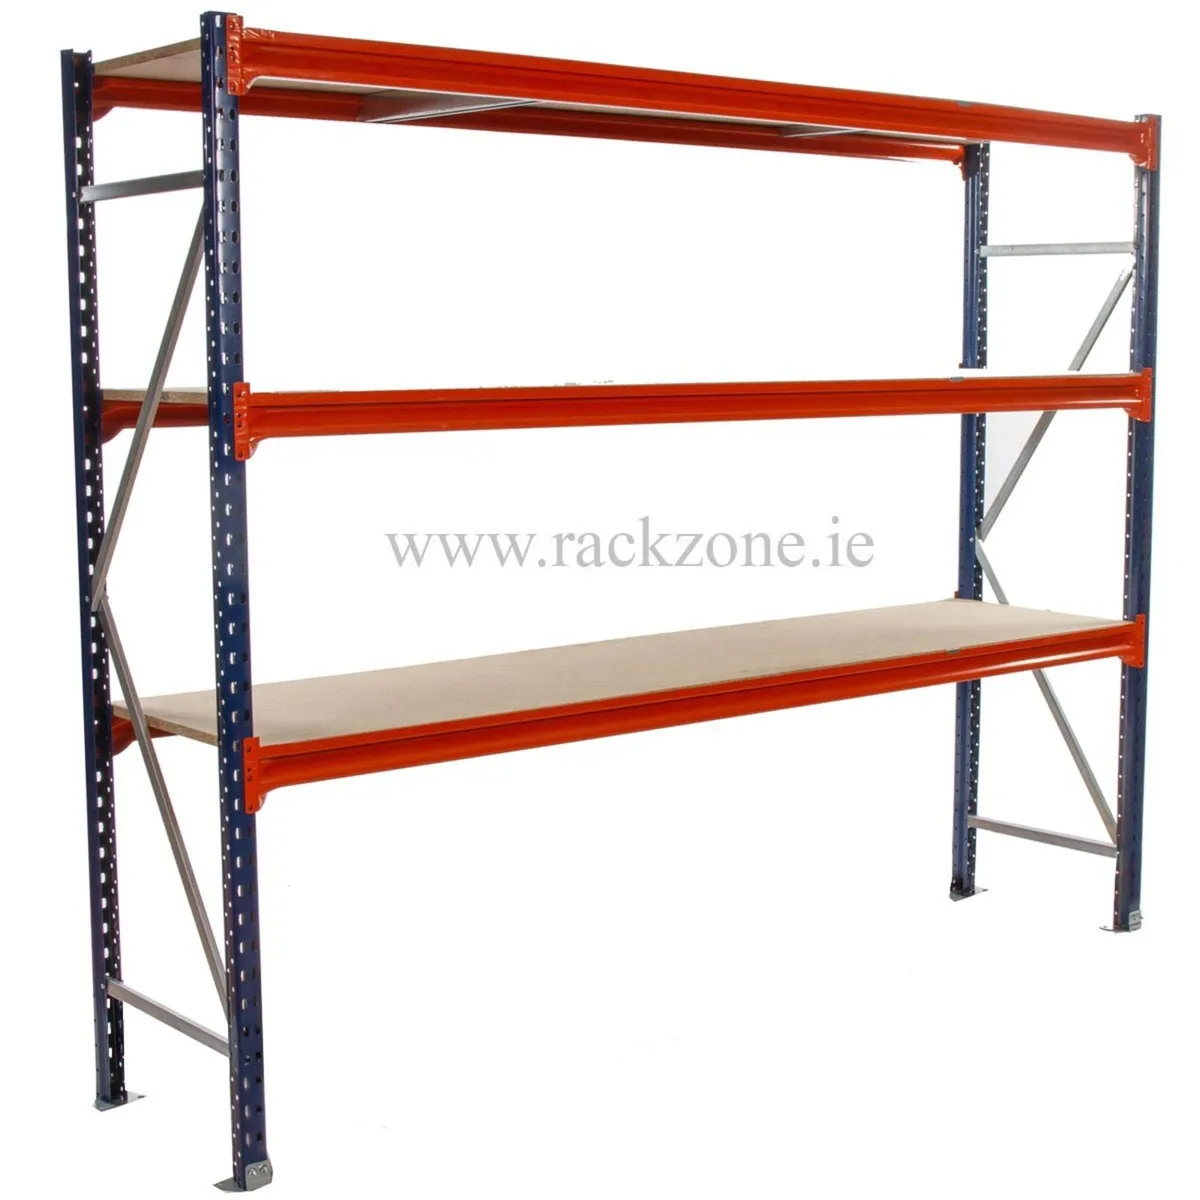 10 BAYS Shelving 2000x2400x800 FREE DELIVER